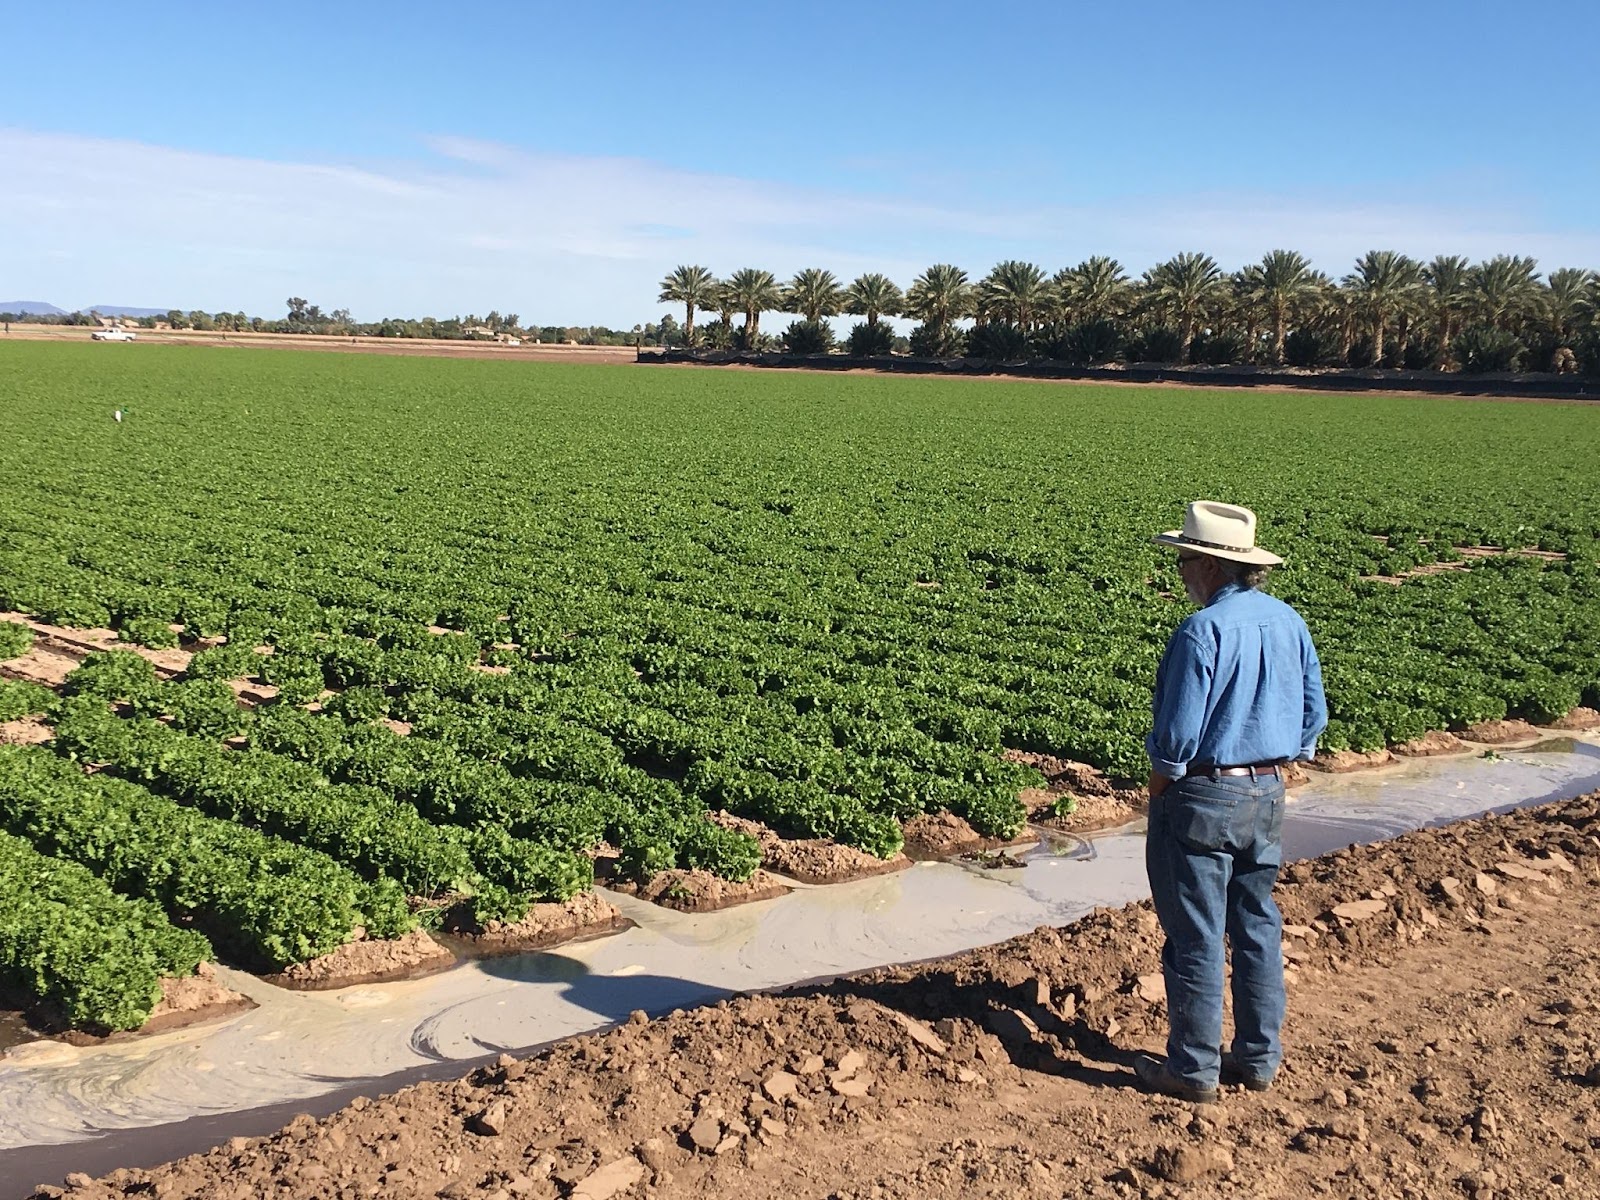 Study seeks to explore future of water sustainability for Yuma farming – The Daily Wildcat